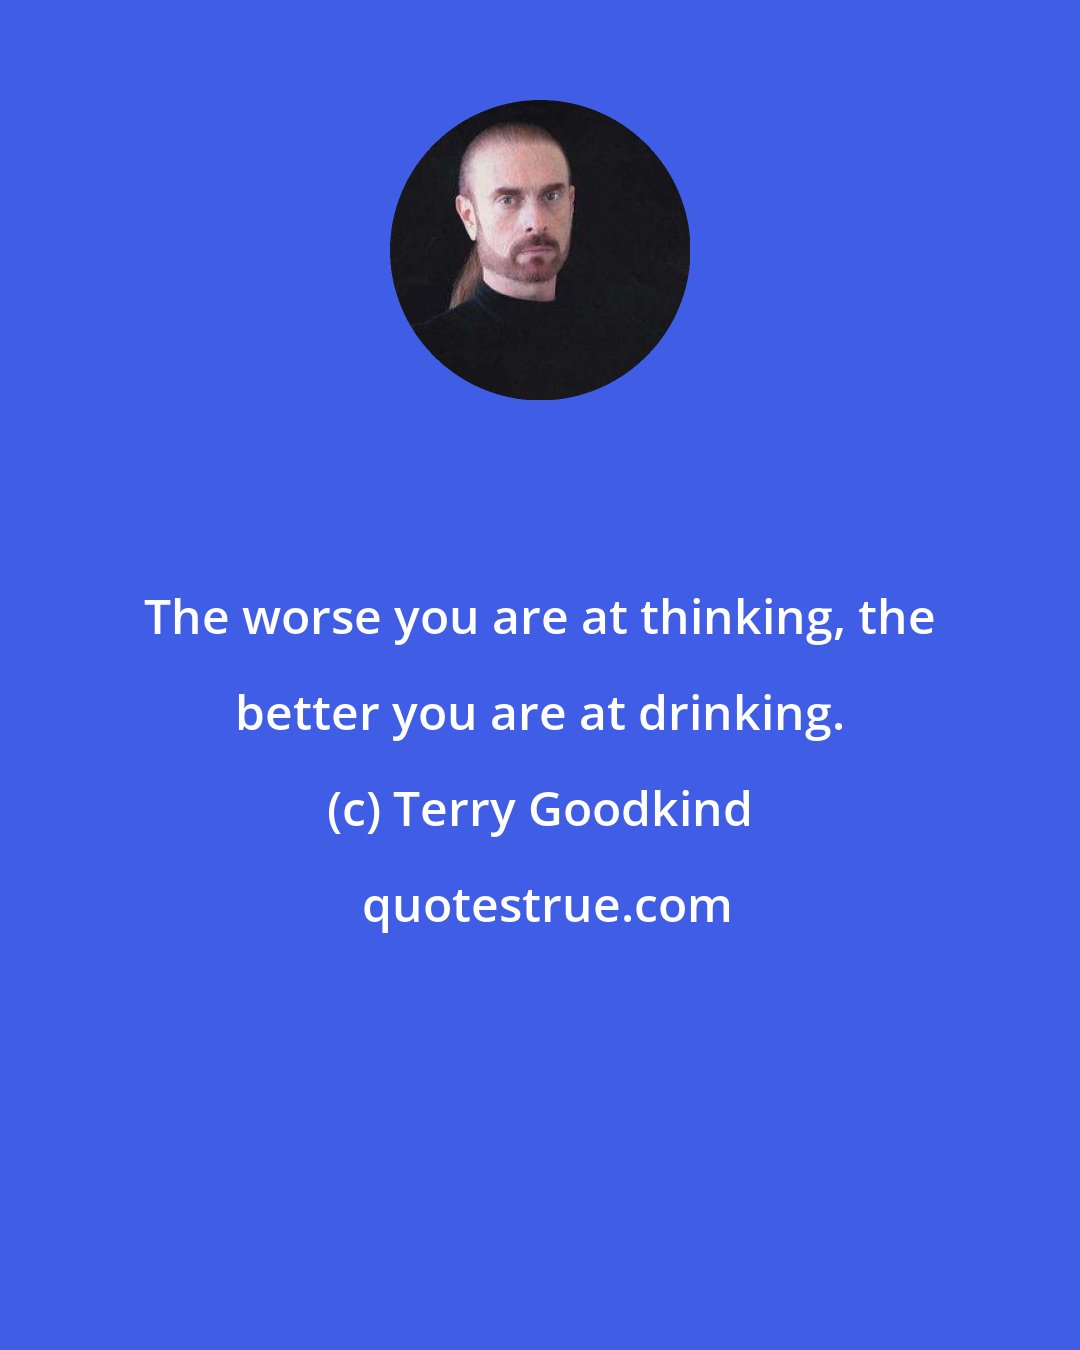 Terry Goodkind: The worse you are at thinking, the better you are at drinking.